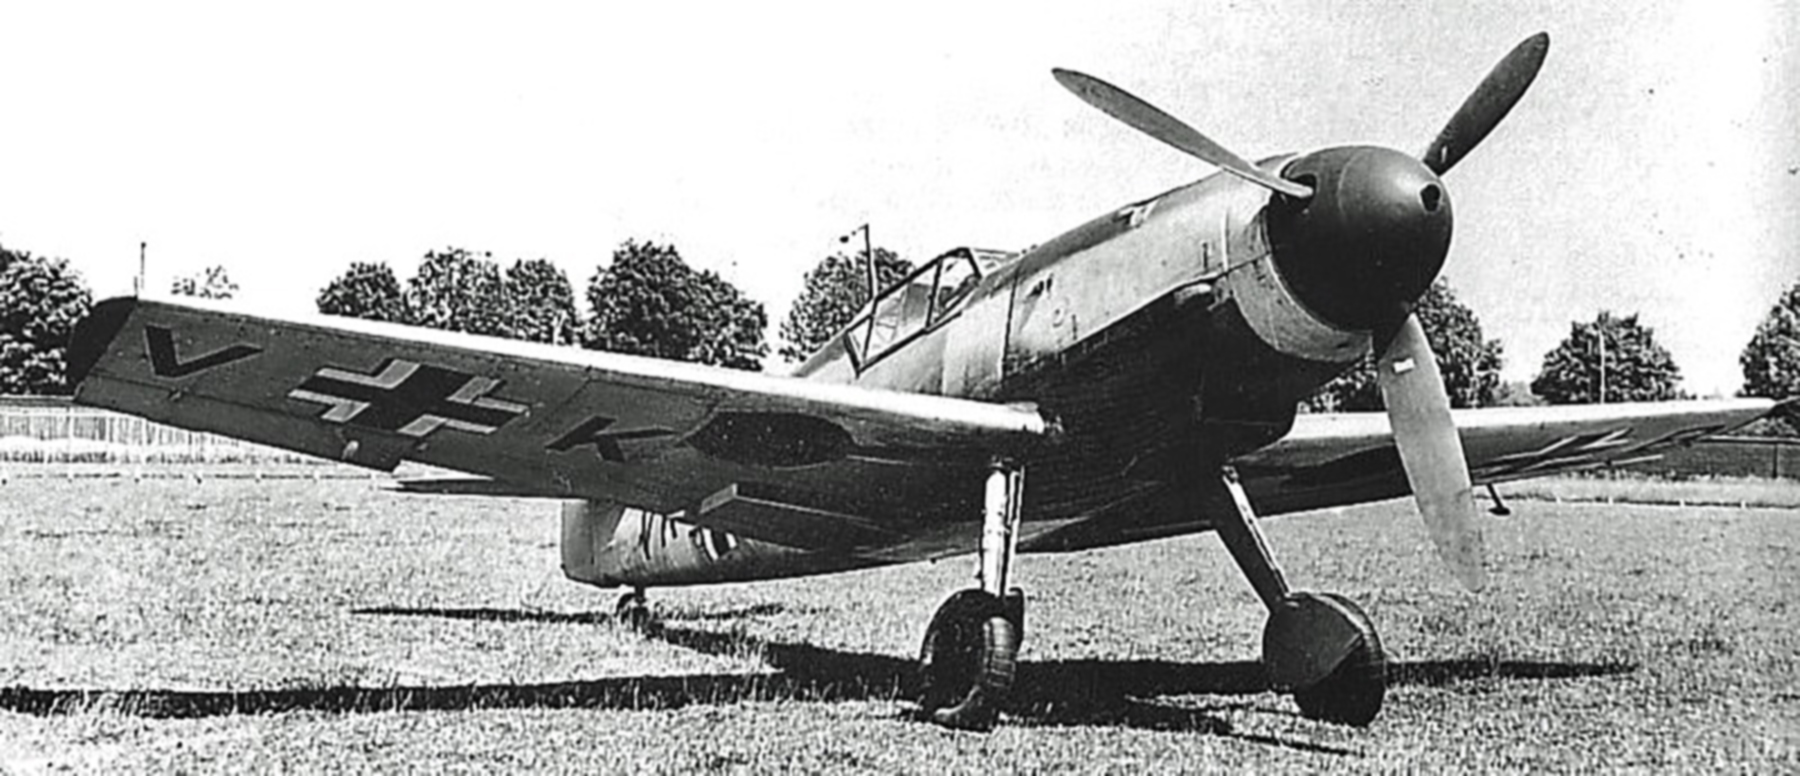 Bf 109V25 D IVKC WNr 1930 later Stkz VK+AC WNr 5605 modified fuselage and new wings 01